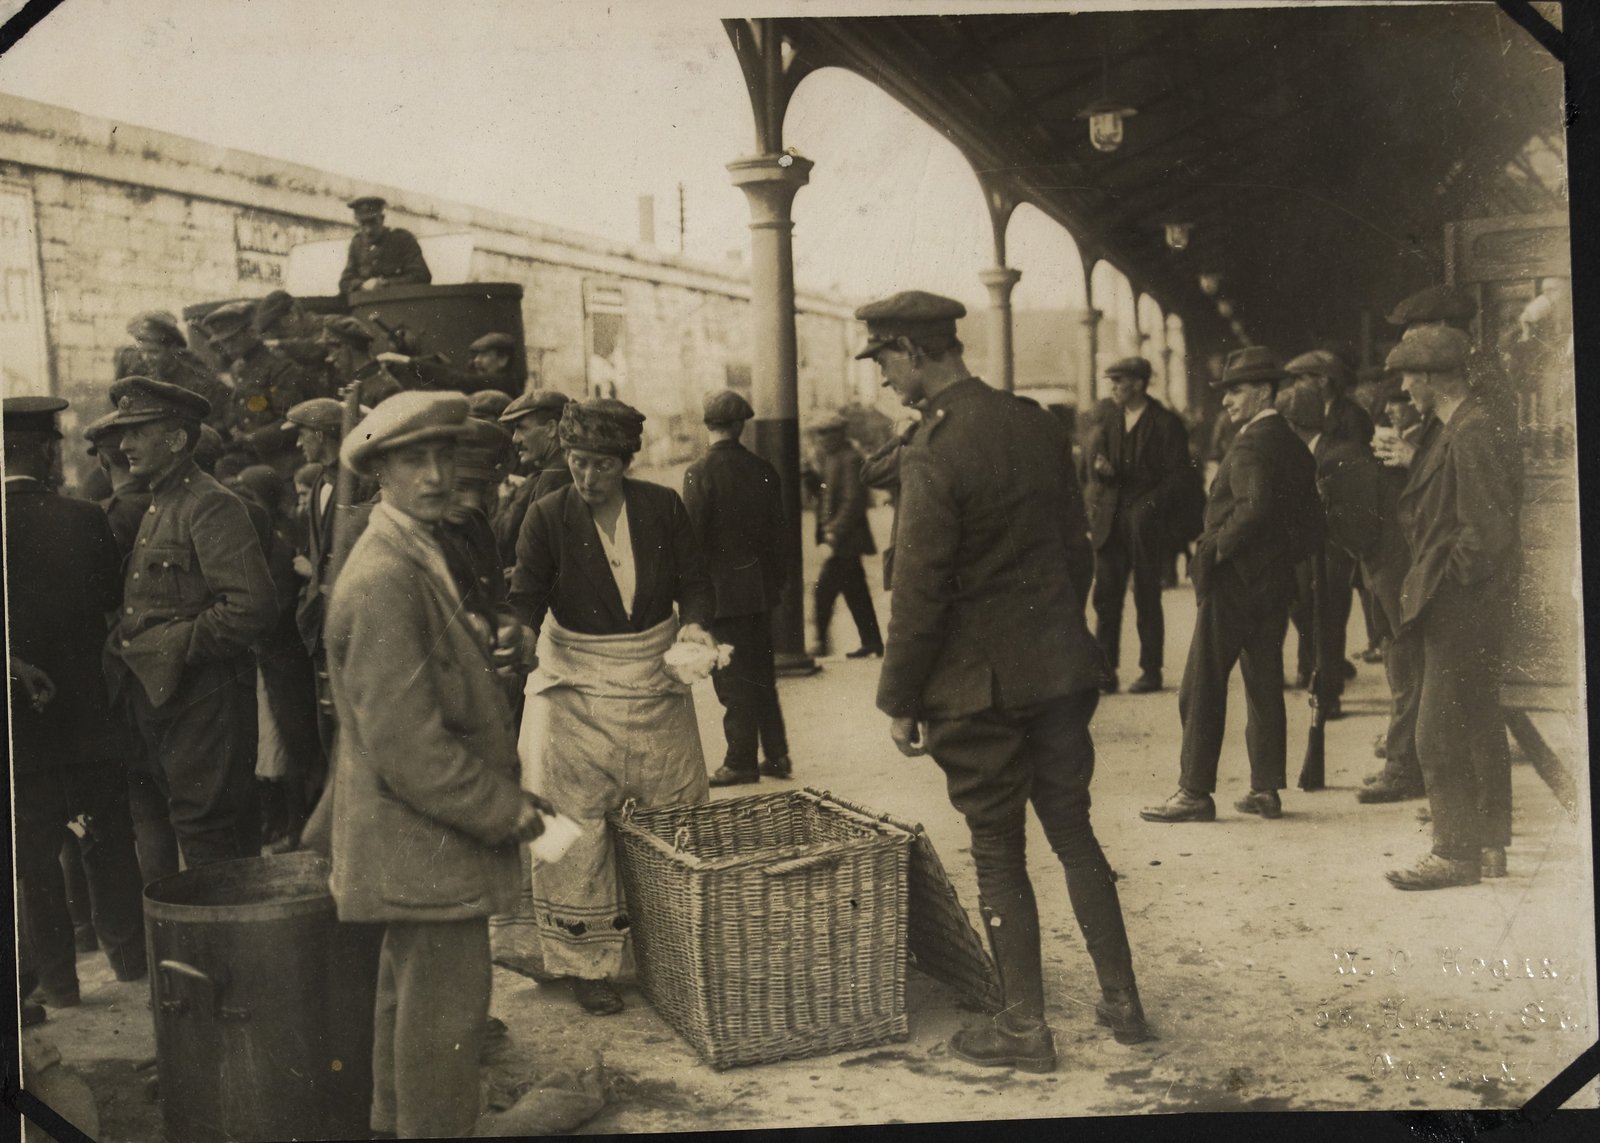 Image - A woman handing out sandwiches to National Army troops on their arrival in Cork. Image courtesy of the National Library of Ireland